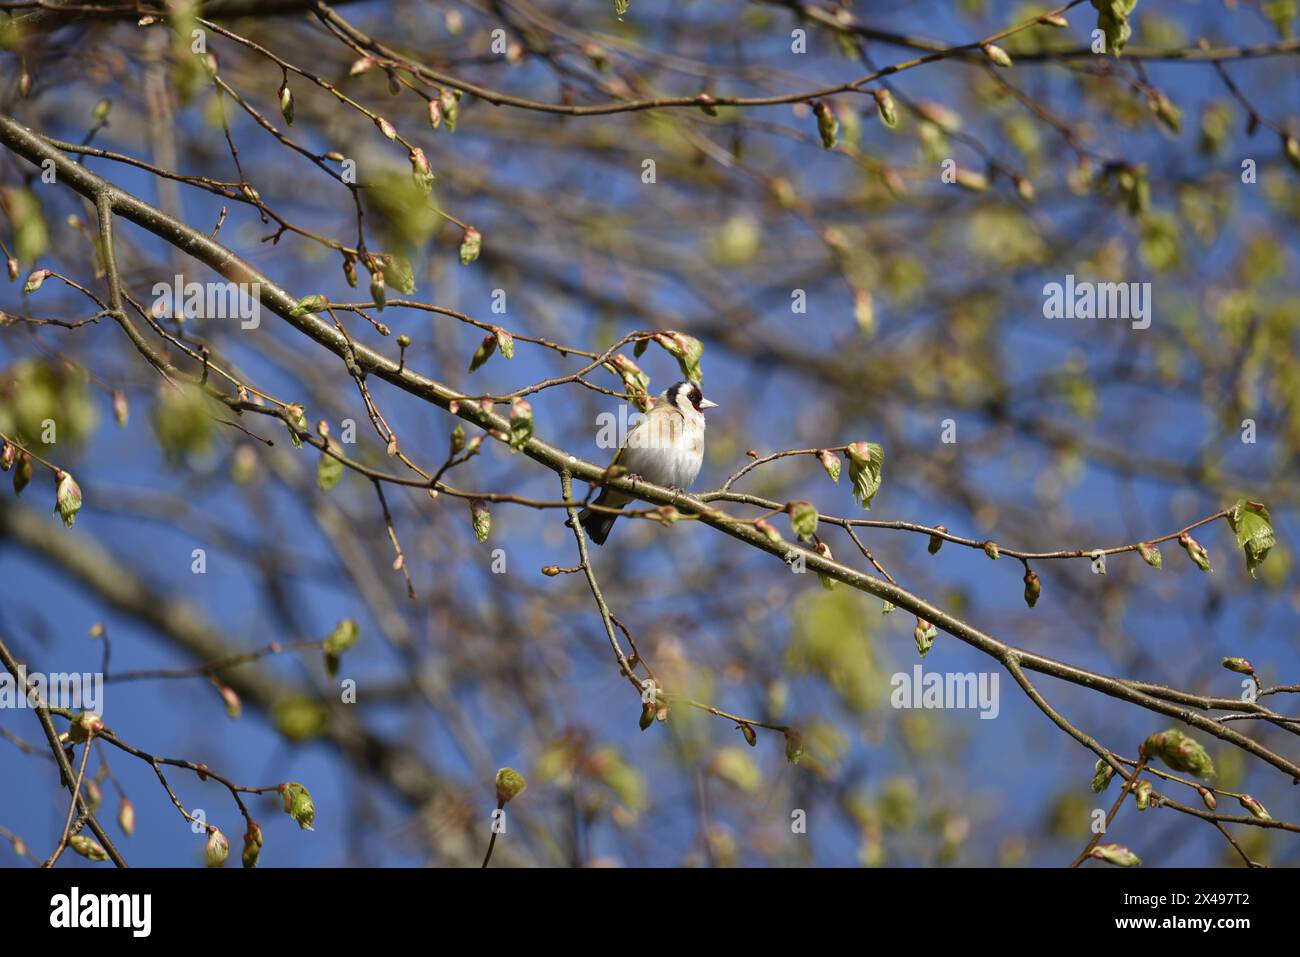 Middle Foreground Image of a European Goldfinch (Carduelis carduelis) Facing Camera with Head Turned to Right, Perched on a Branch against a Blue Sky Stock Photo